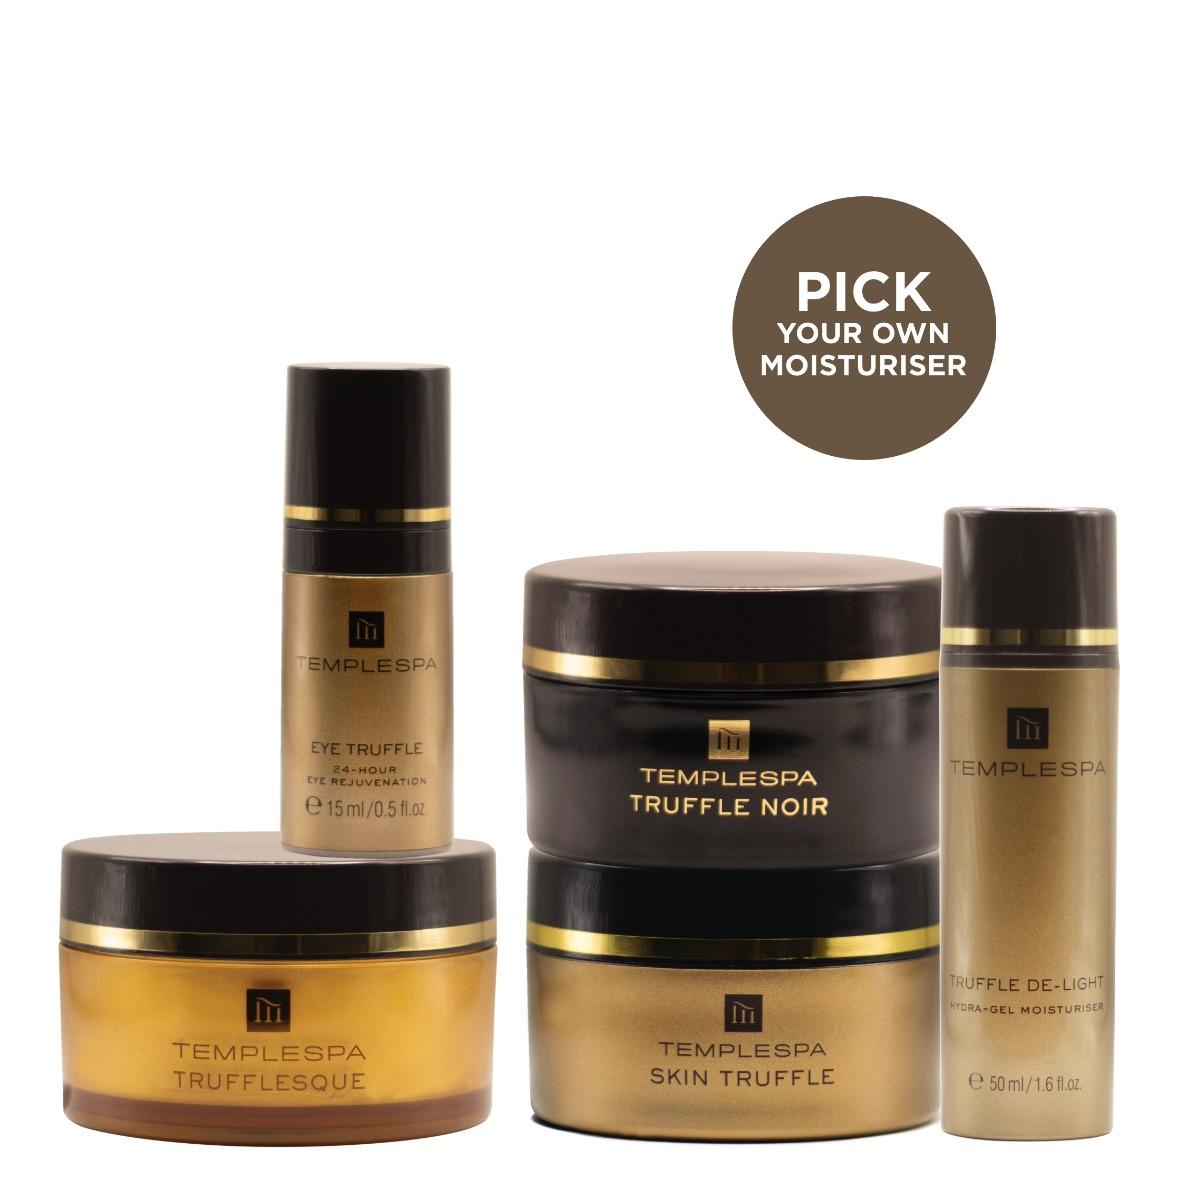 The ultimate luxury skincare collection! - TRUFFLE LUXE COLLECTION